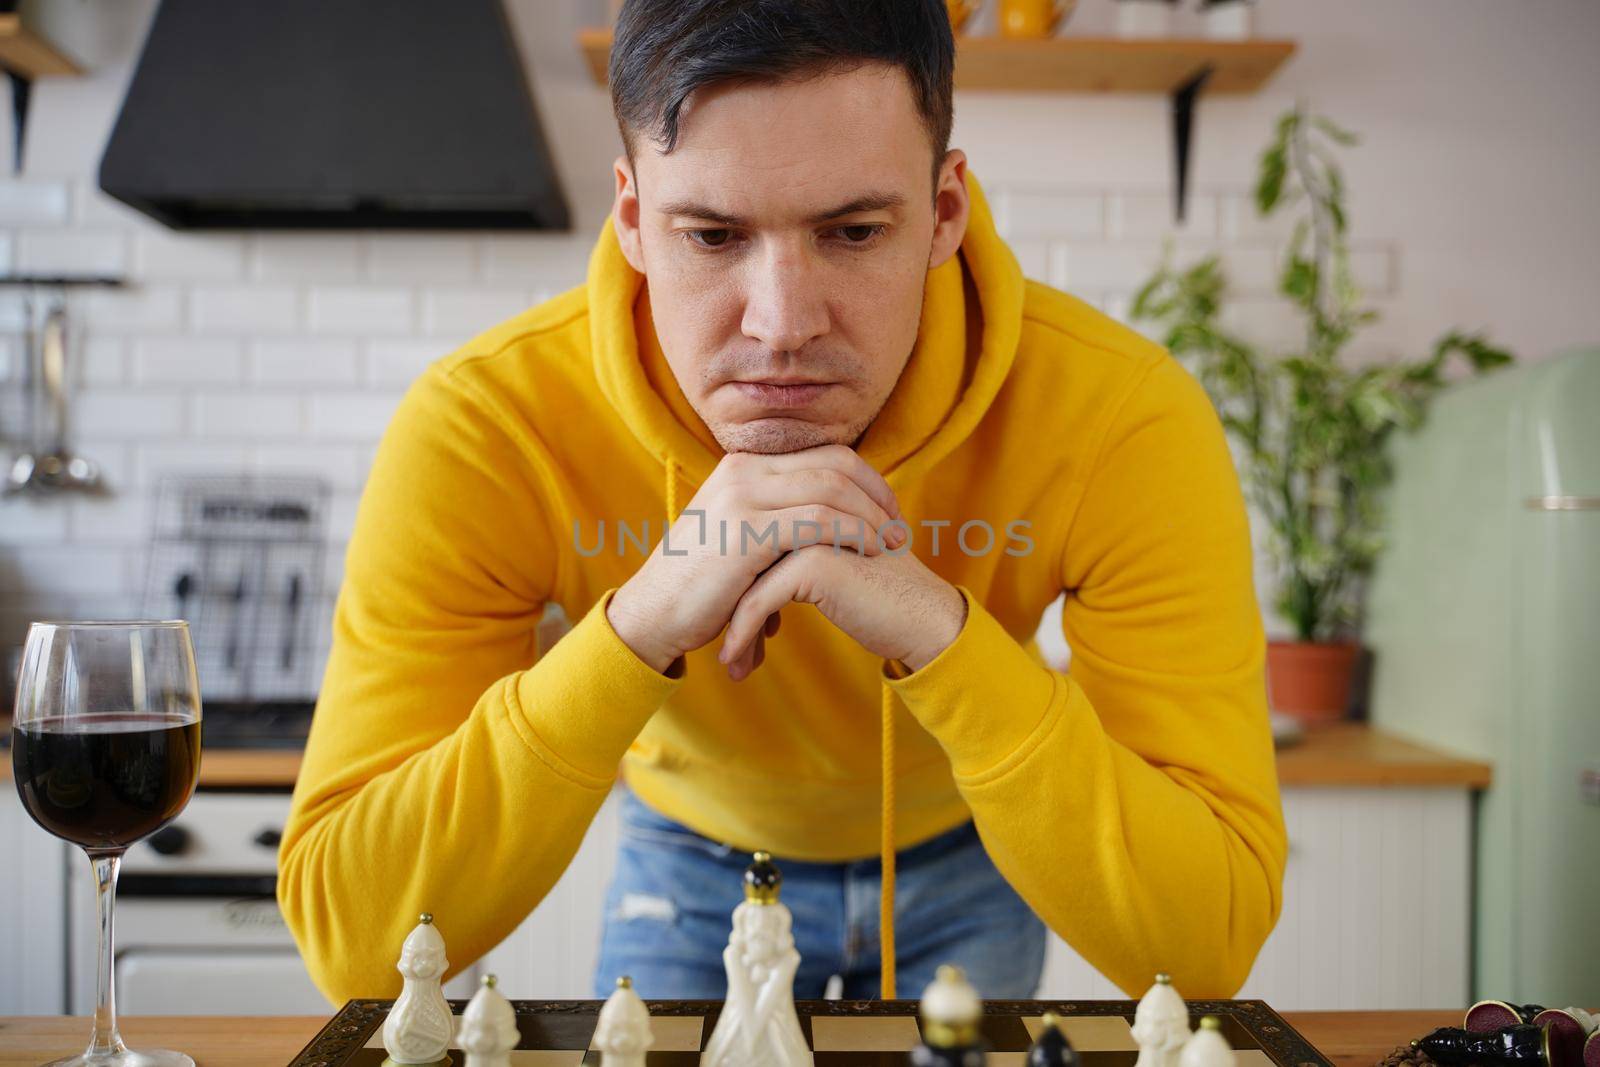 Young man playing chess on kitchen table. Male plays in logical board game with himself, standing in kitchen